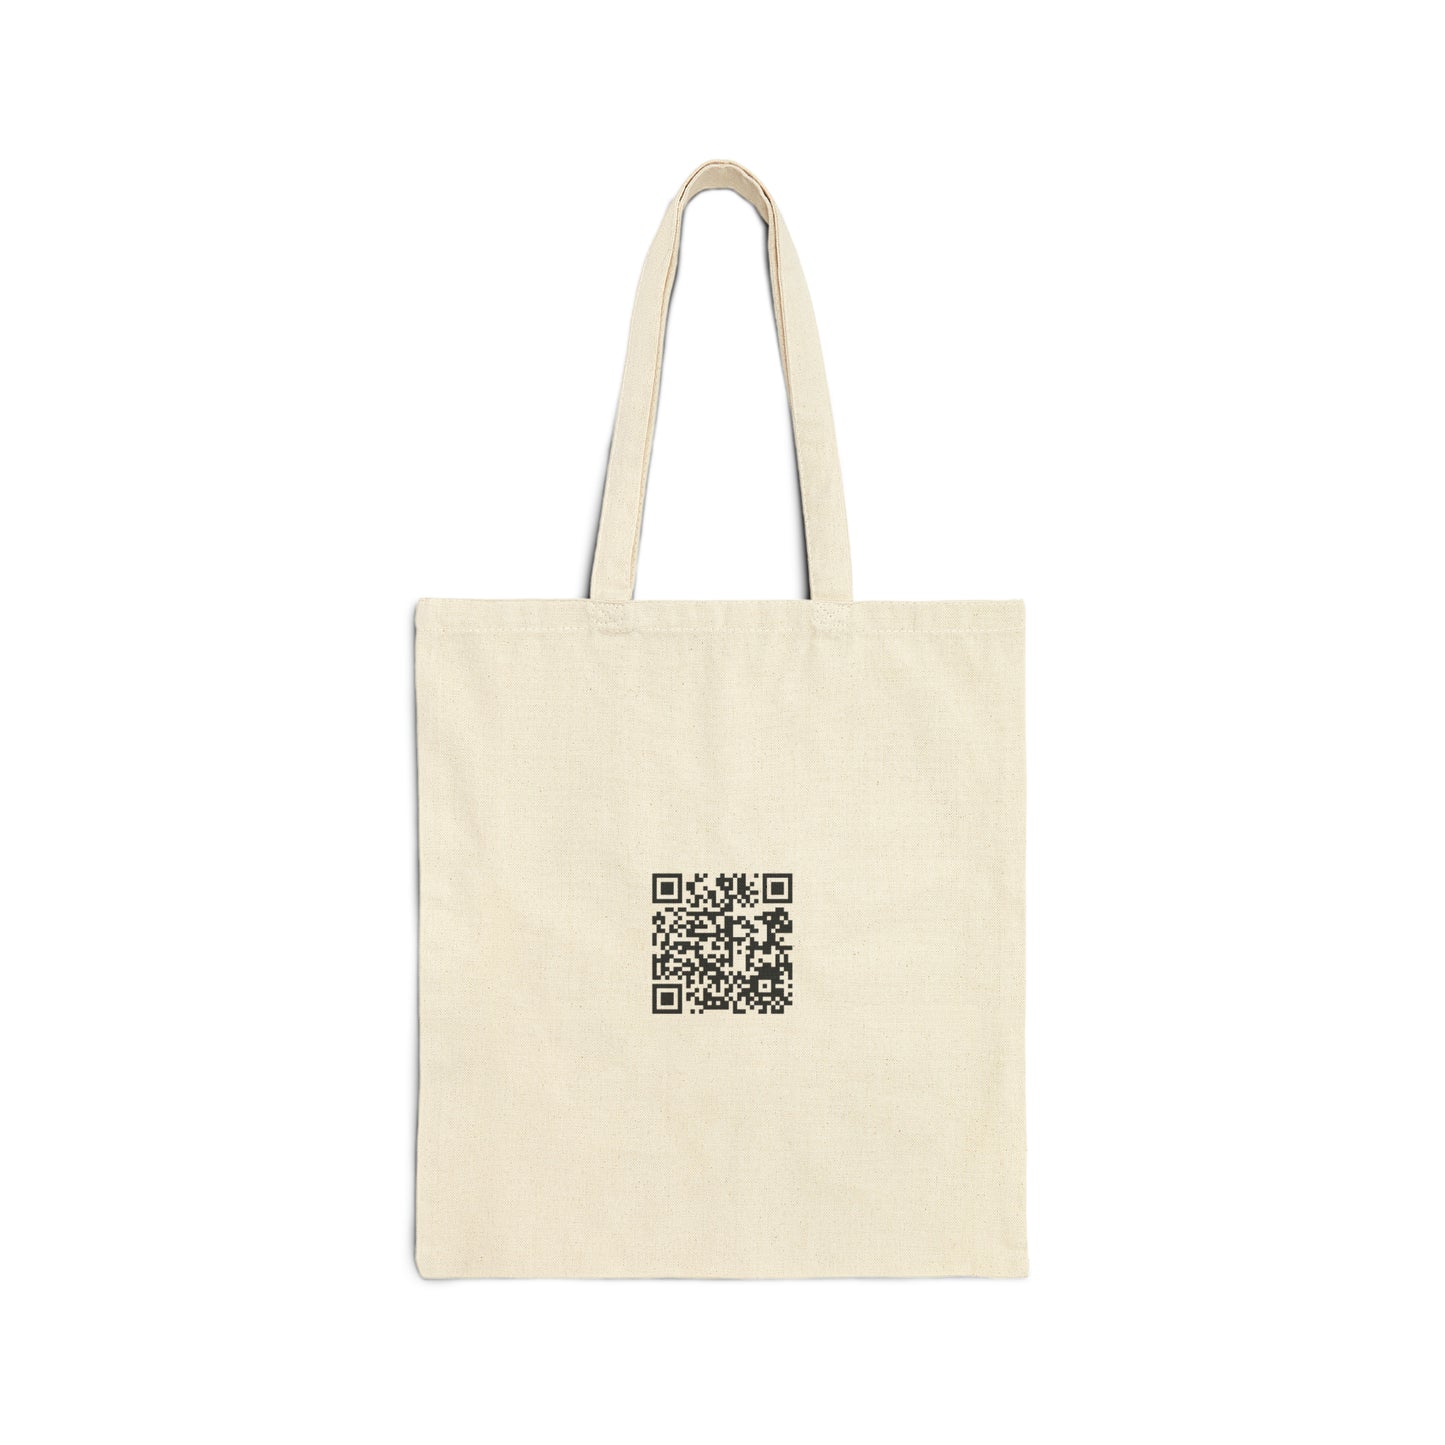 The Whistleblower Onslaught - Cotton Canvas Tote Bag